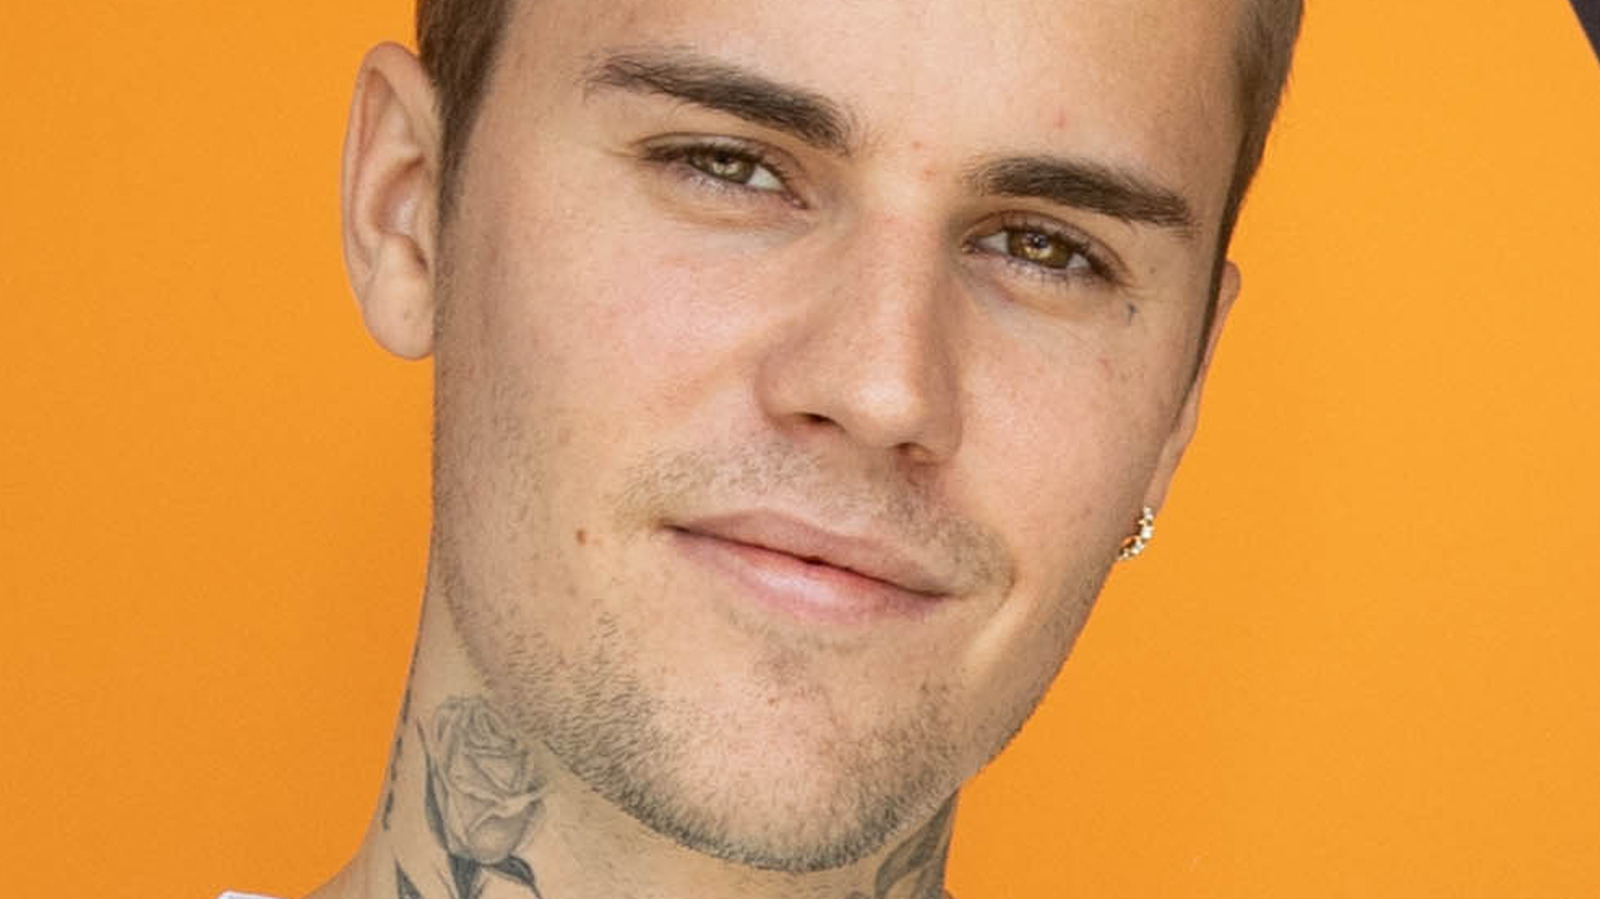 Justin Bieber Opens Up About How 'Where Are U Now' Came Together – Watch Now!, diplo, Justin Bieber, Music, Skillrex